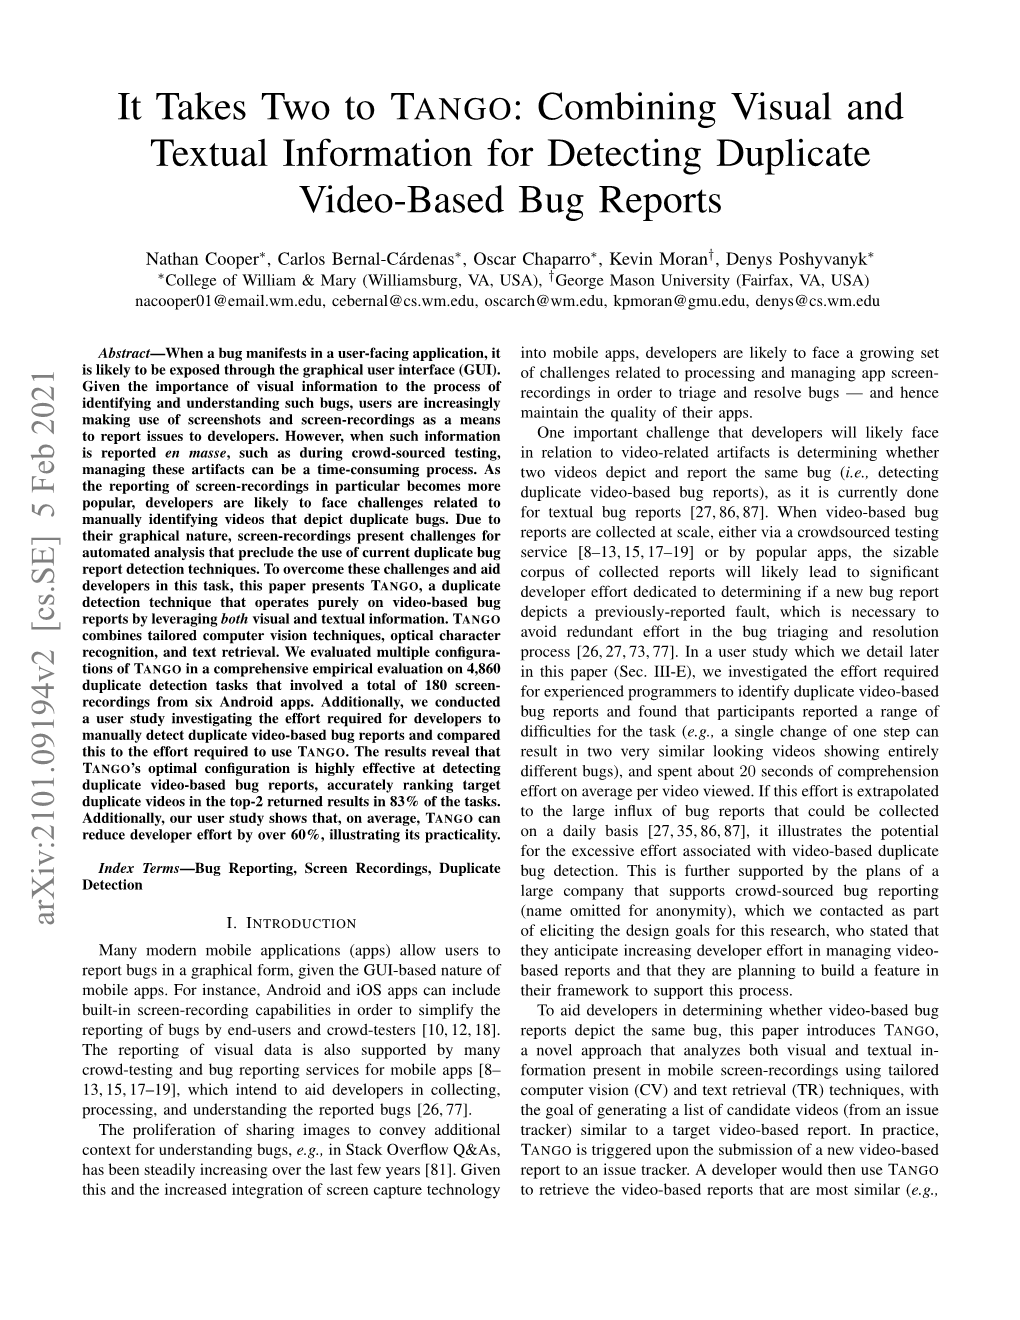 It Takes Two to TANGO: Combining Visual and Textual Information for Detecting Duplicate Video-Based Bug Reports